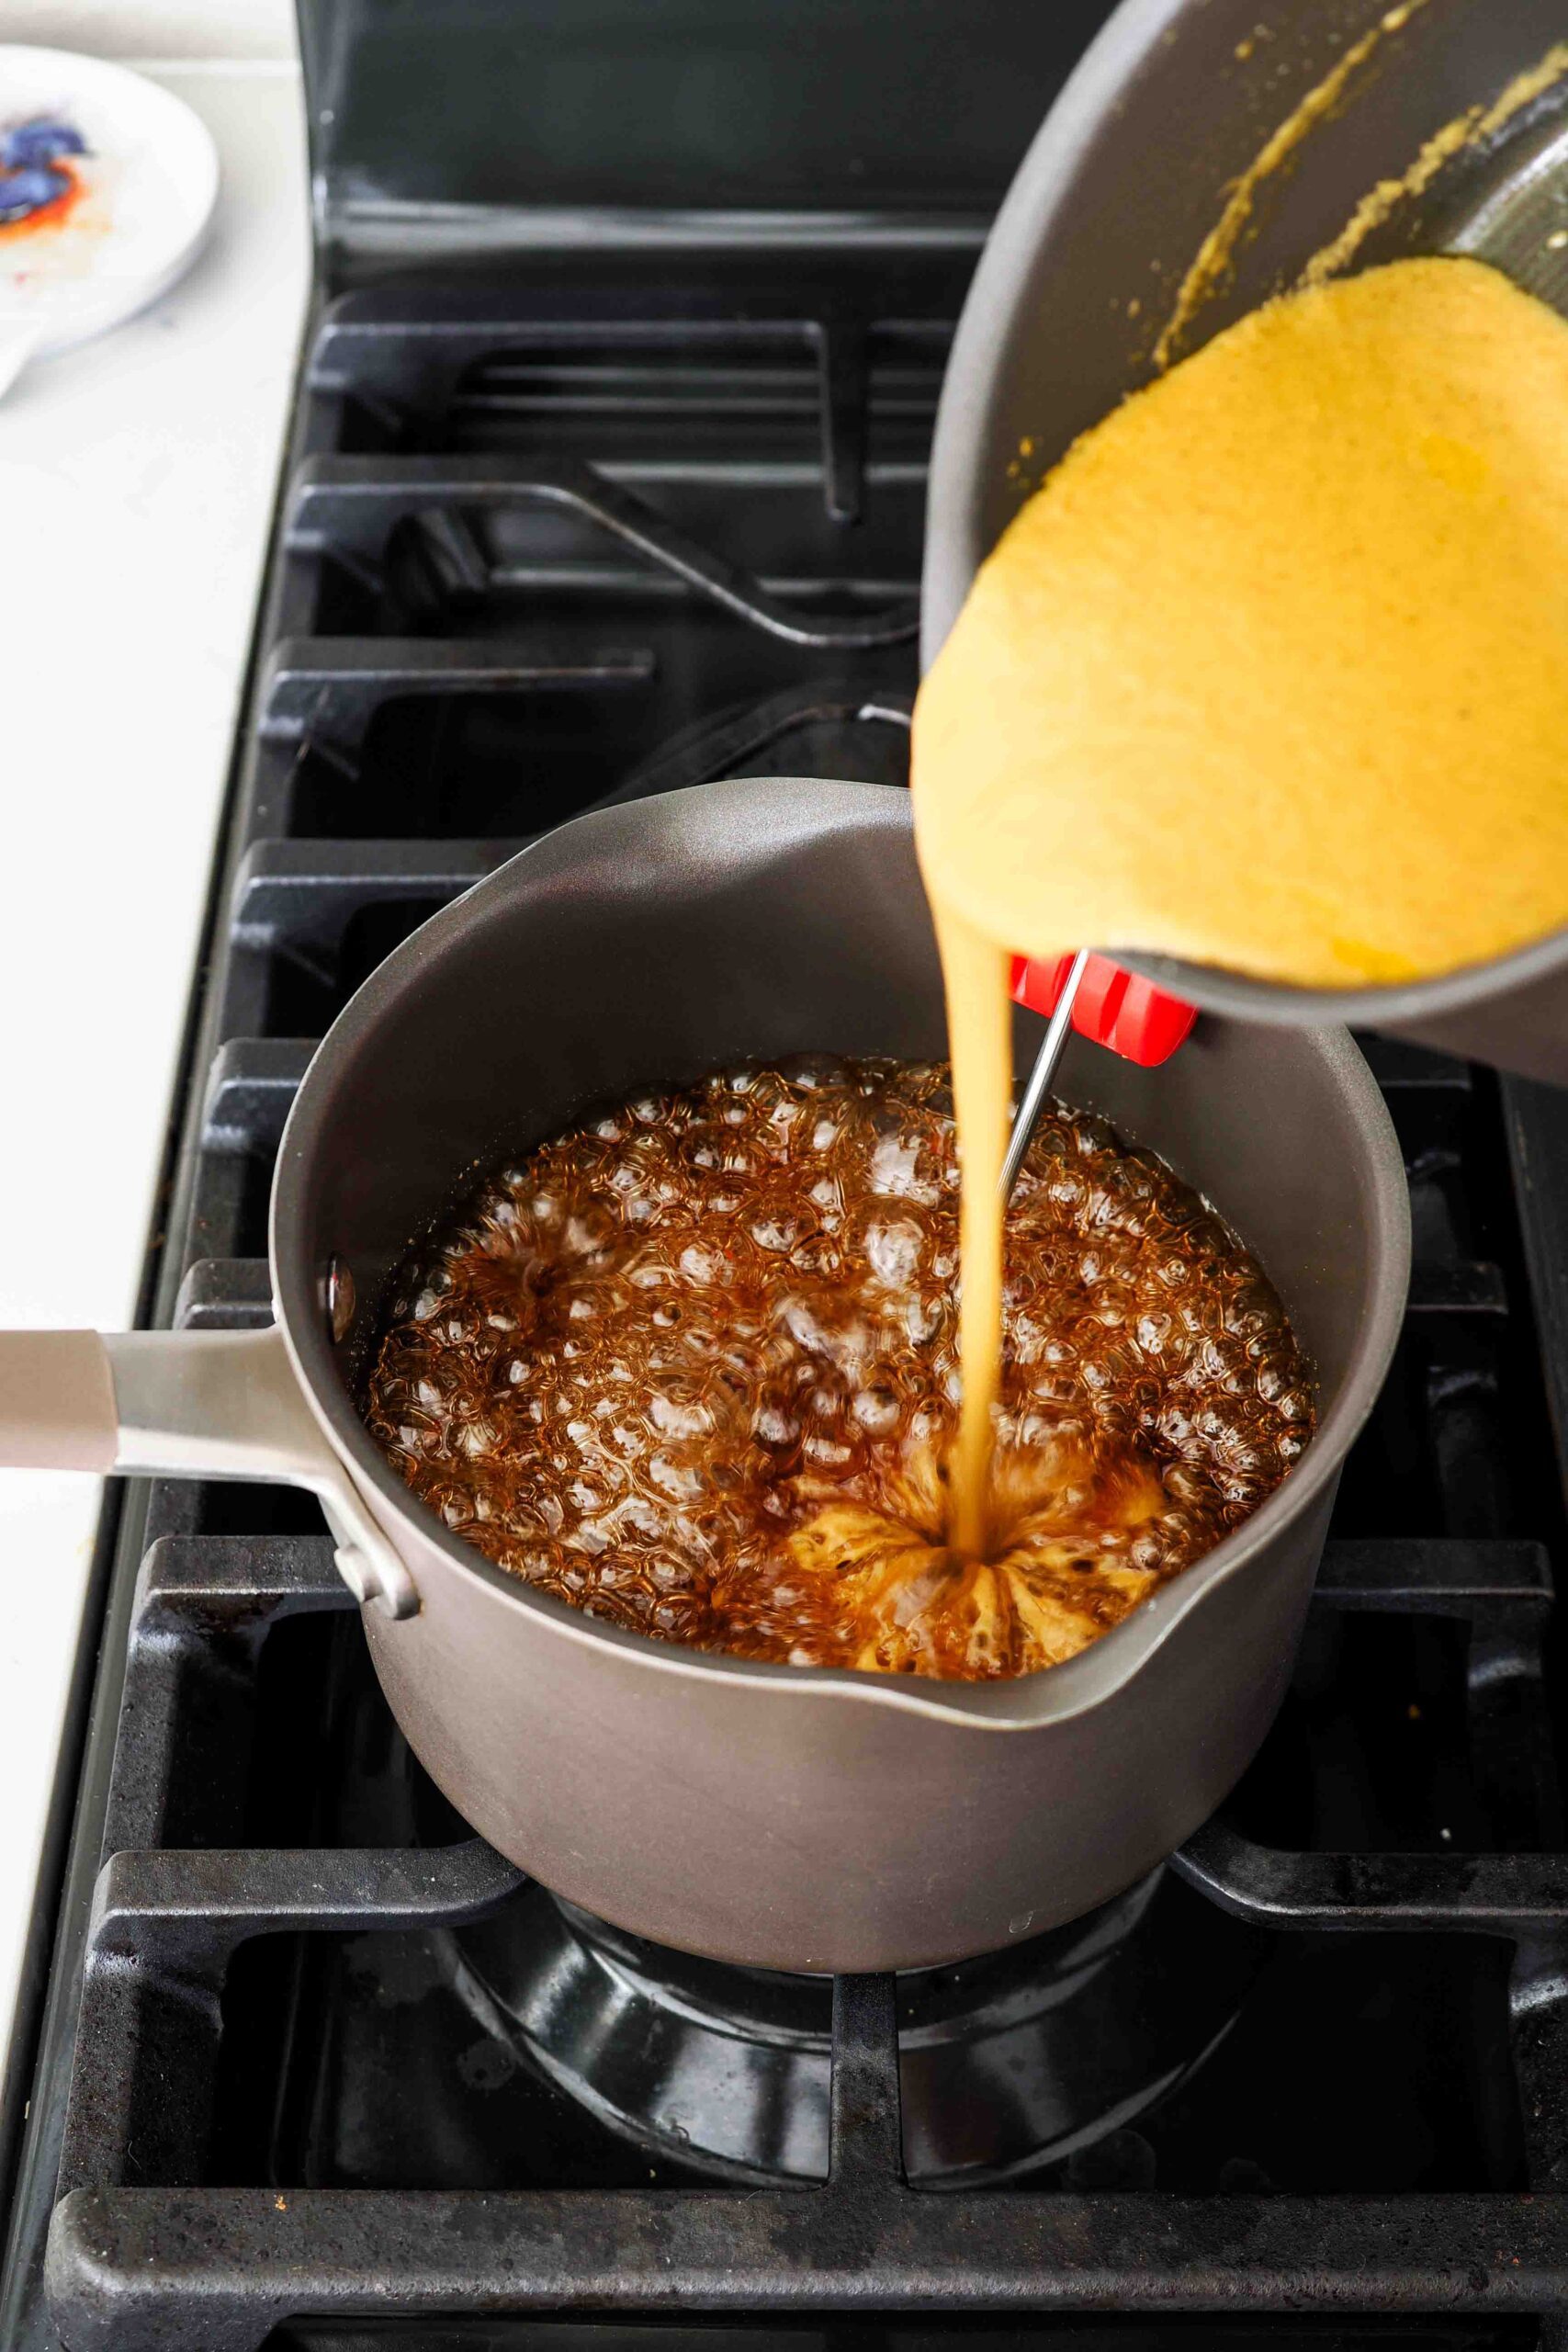 Pumpkin cream is poured into a pot of caramel over the stove.